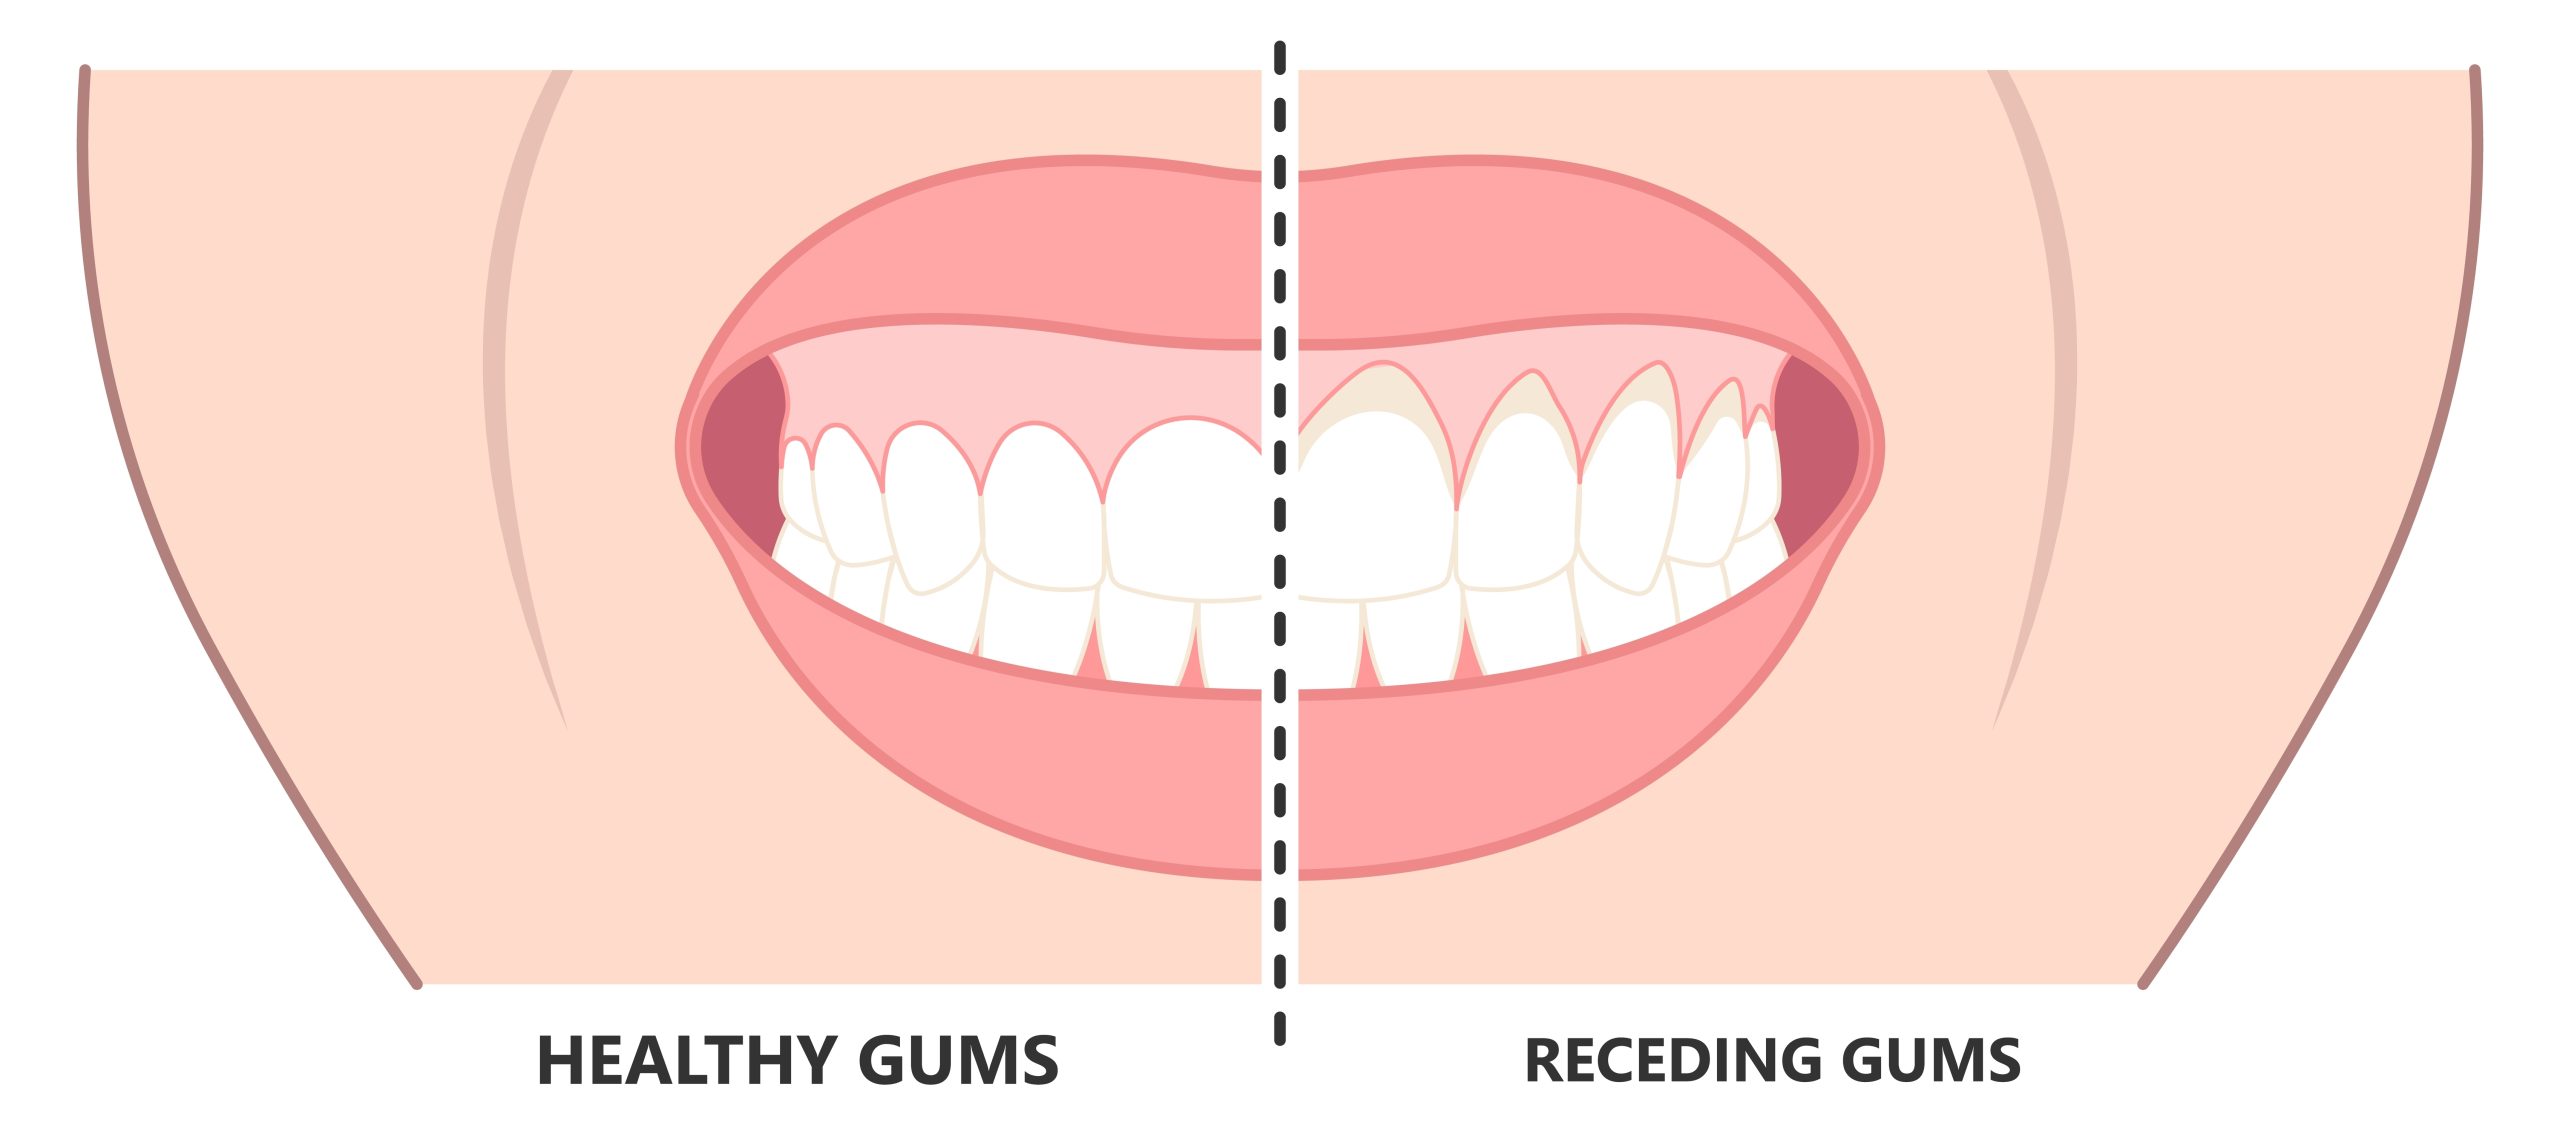 Dip Gum Disease, Tooth Loss, and Other Effects